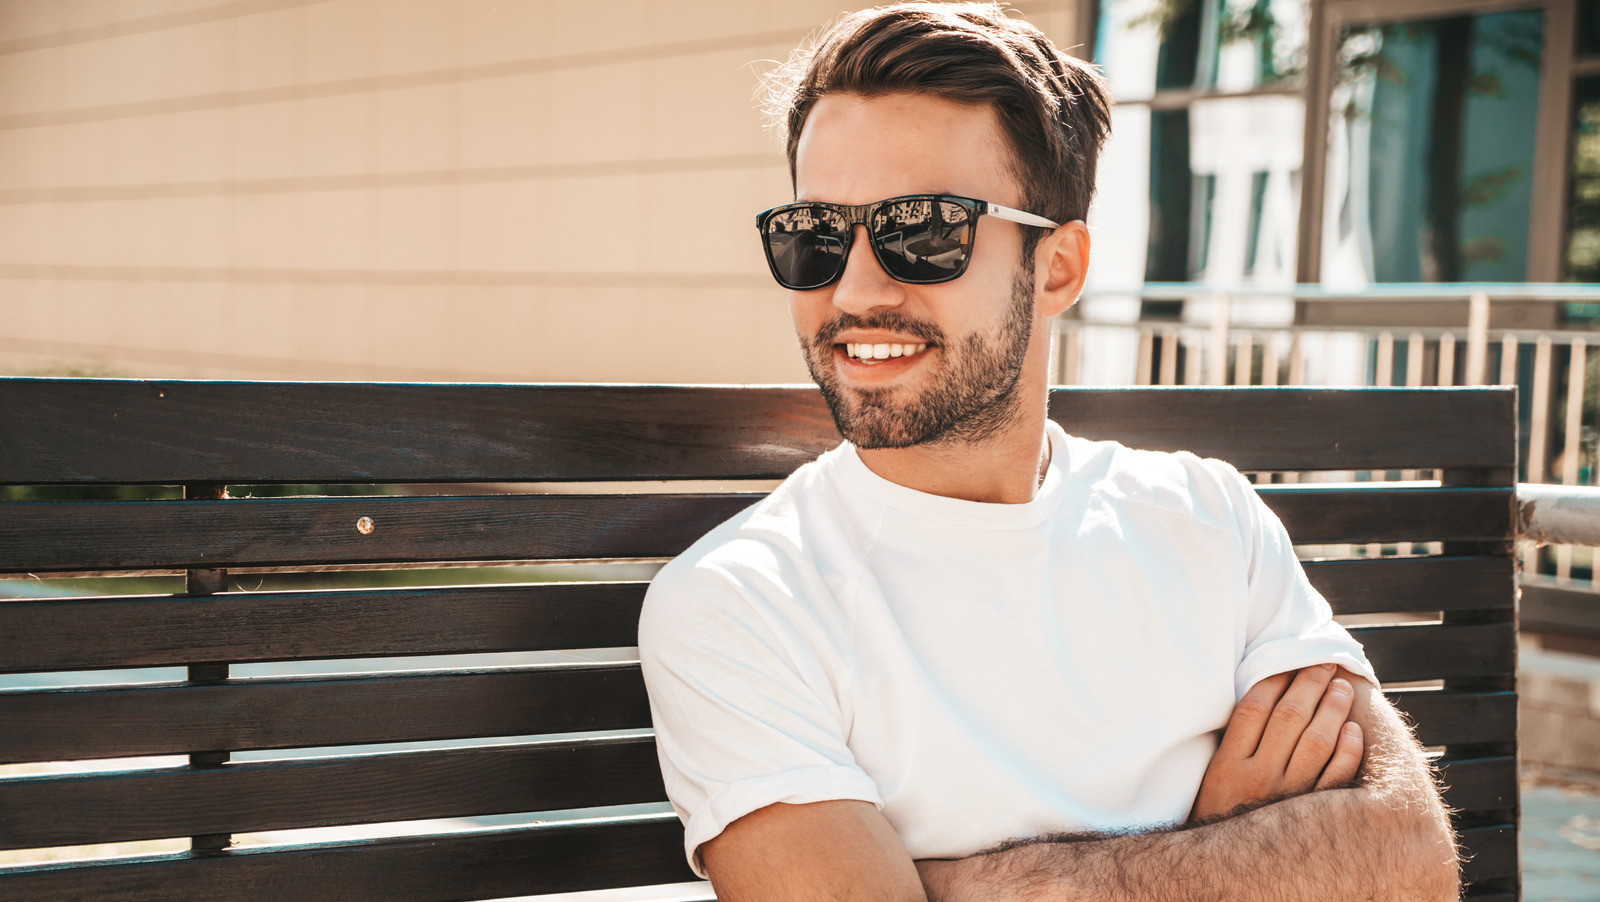 https://www.thelist.com/img/gallery/the-trendiest-sunglasses-for-men-in-2021/l-intro-1626802678.jpg